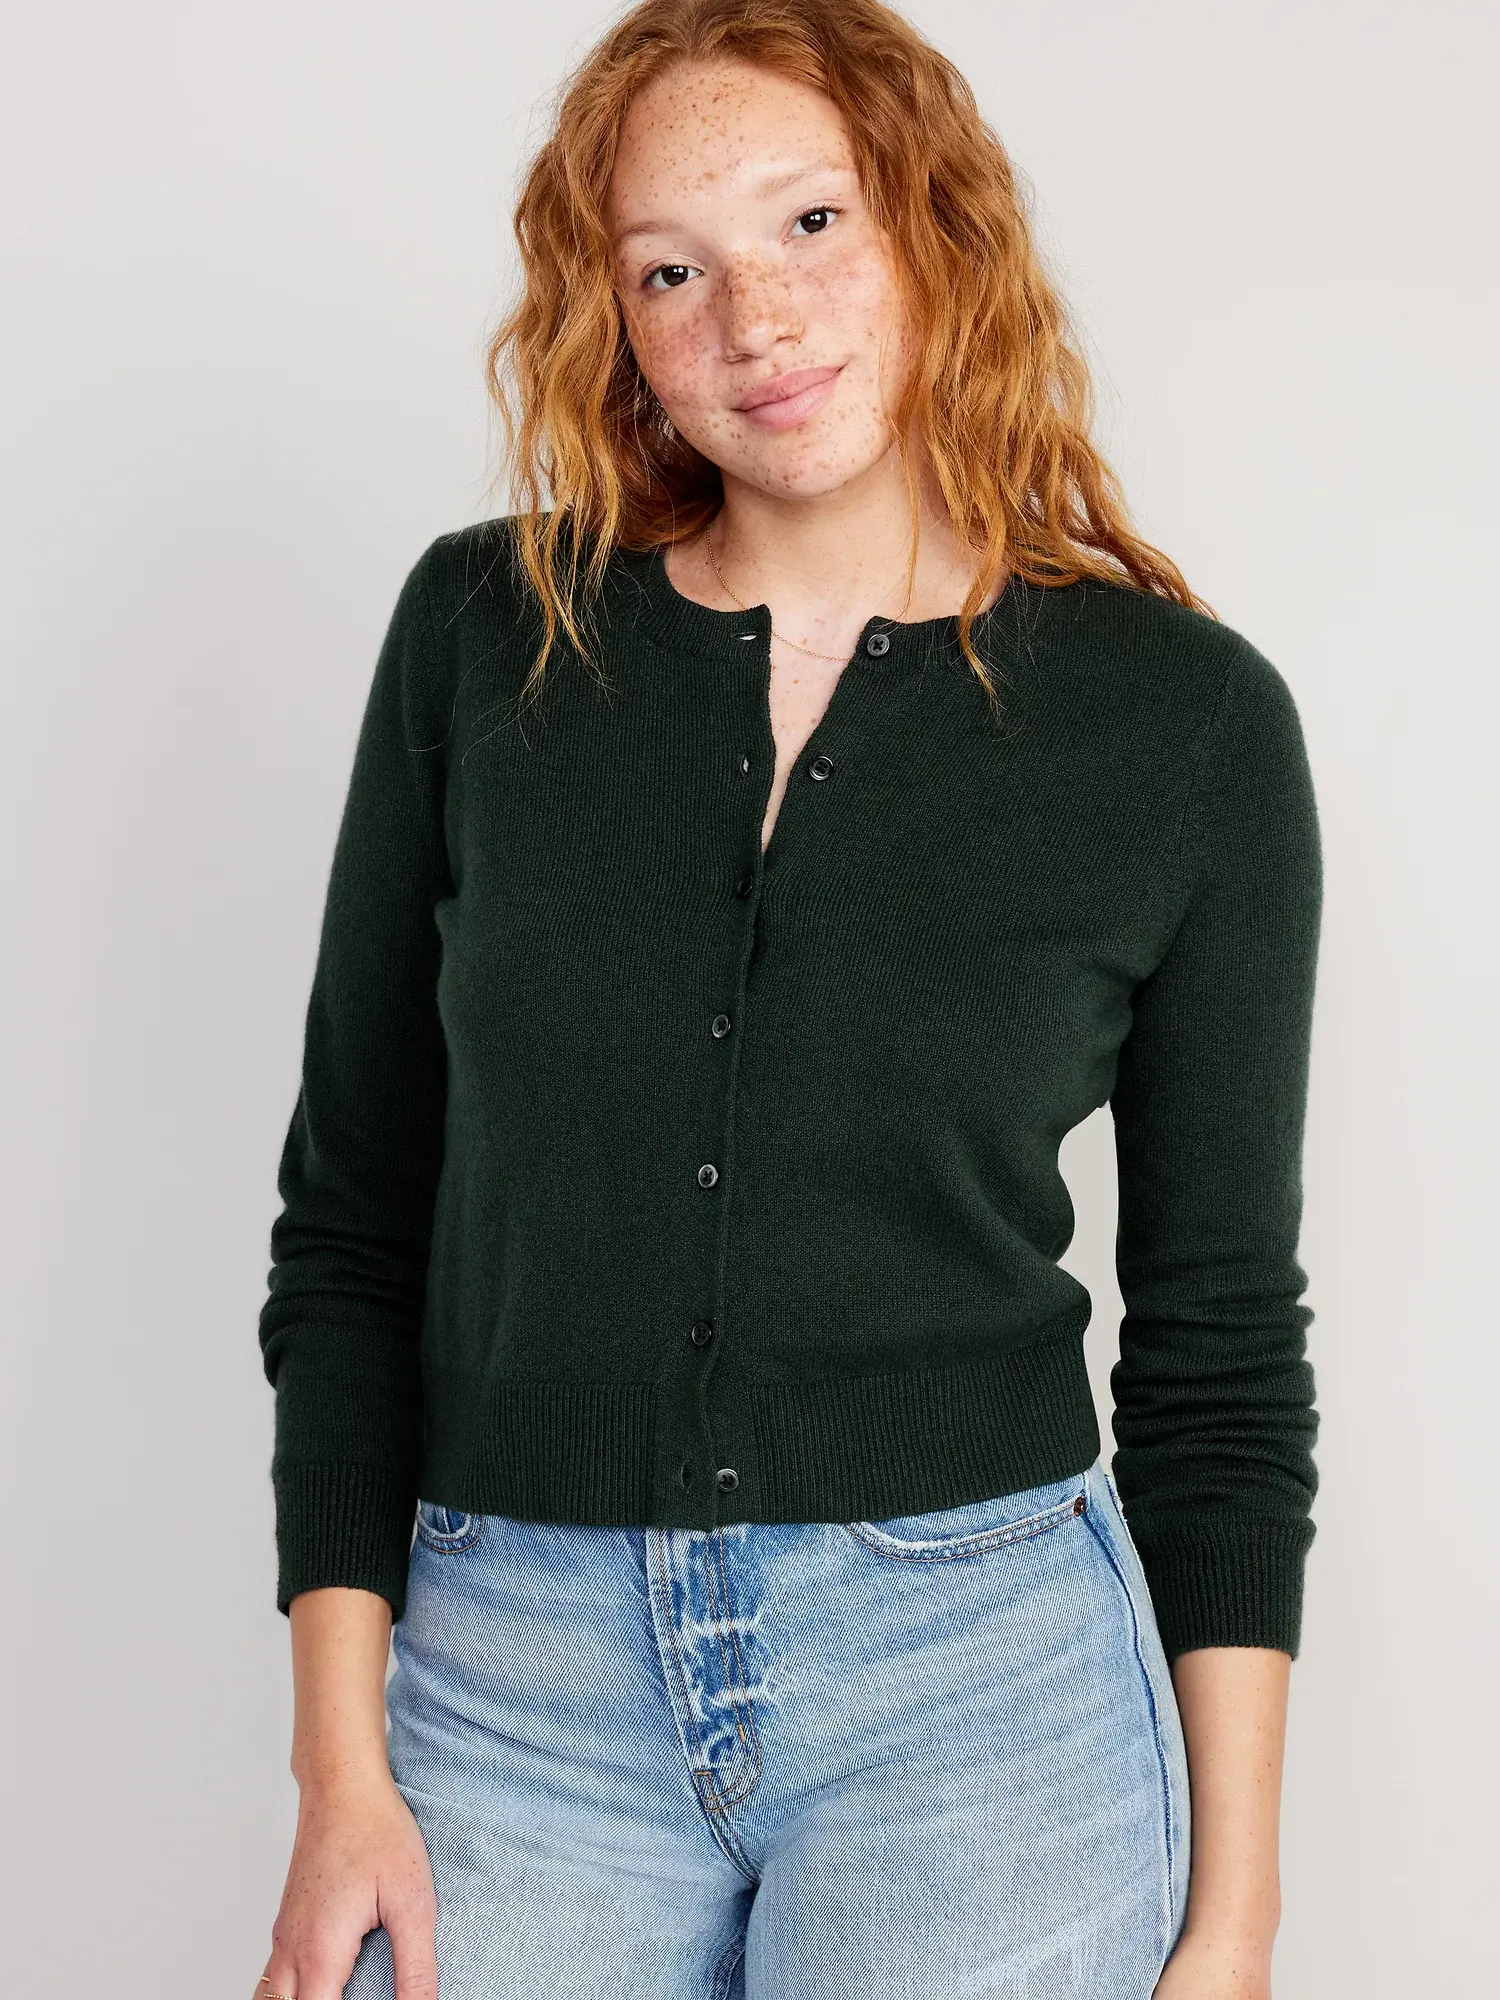 Old Navy SoSoft Cropped Cardigan Sweater for Women green. 1